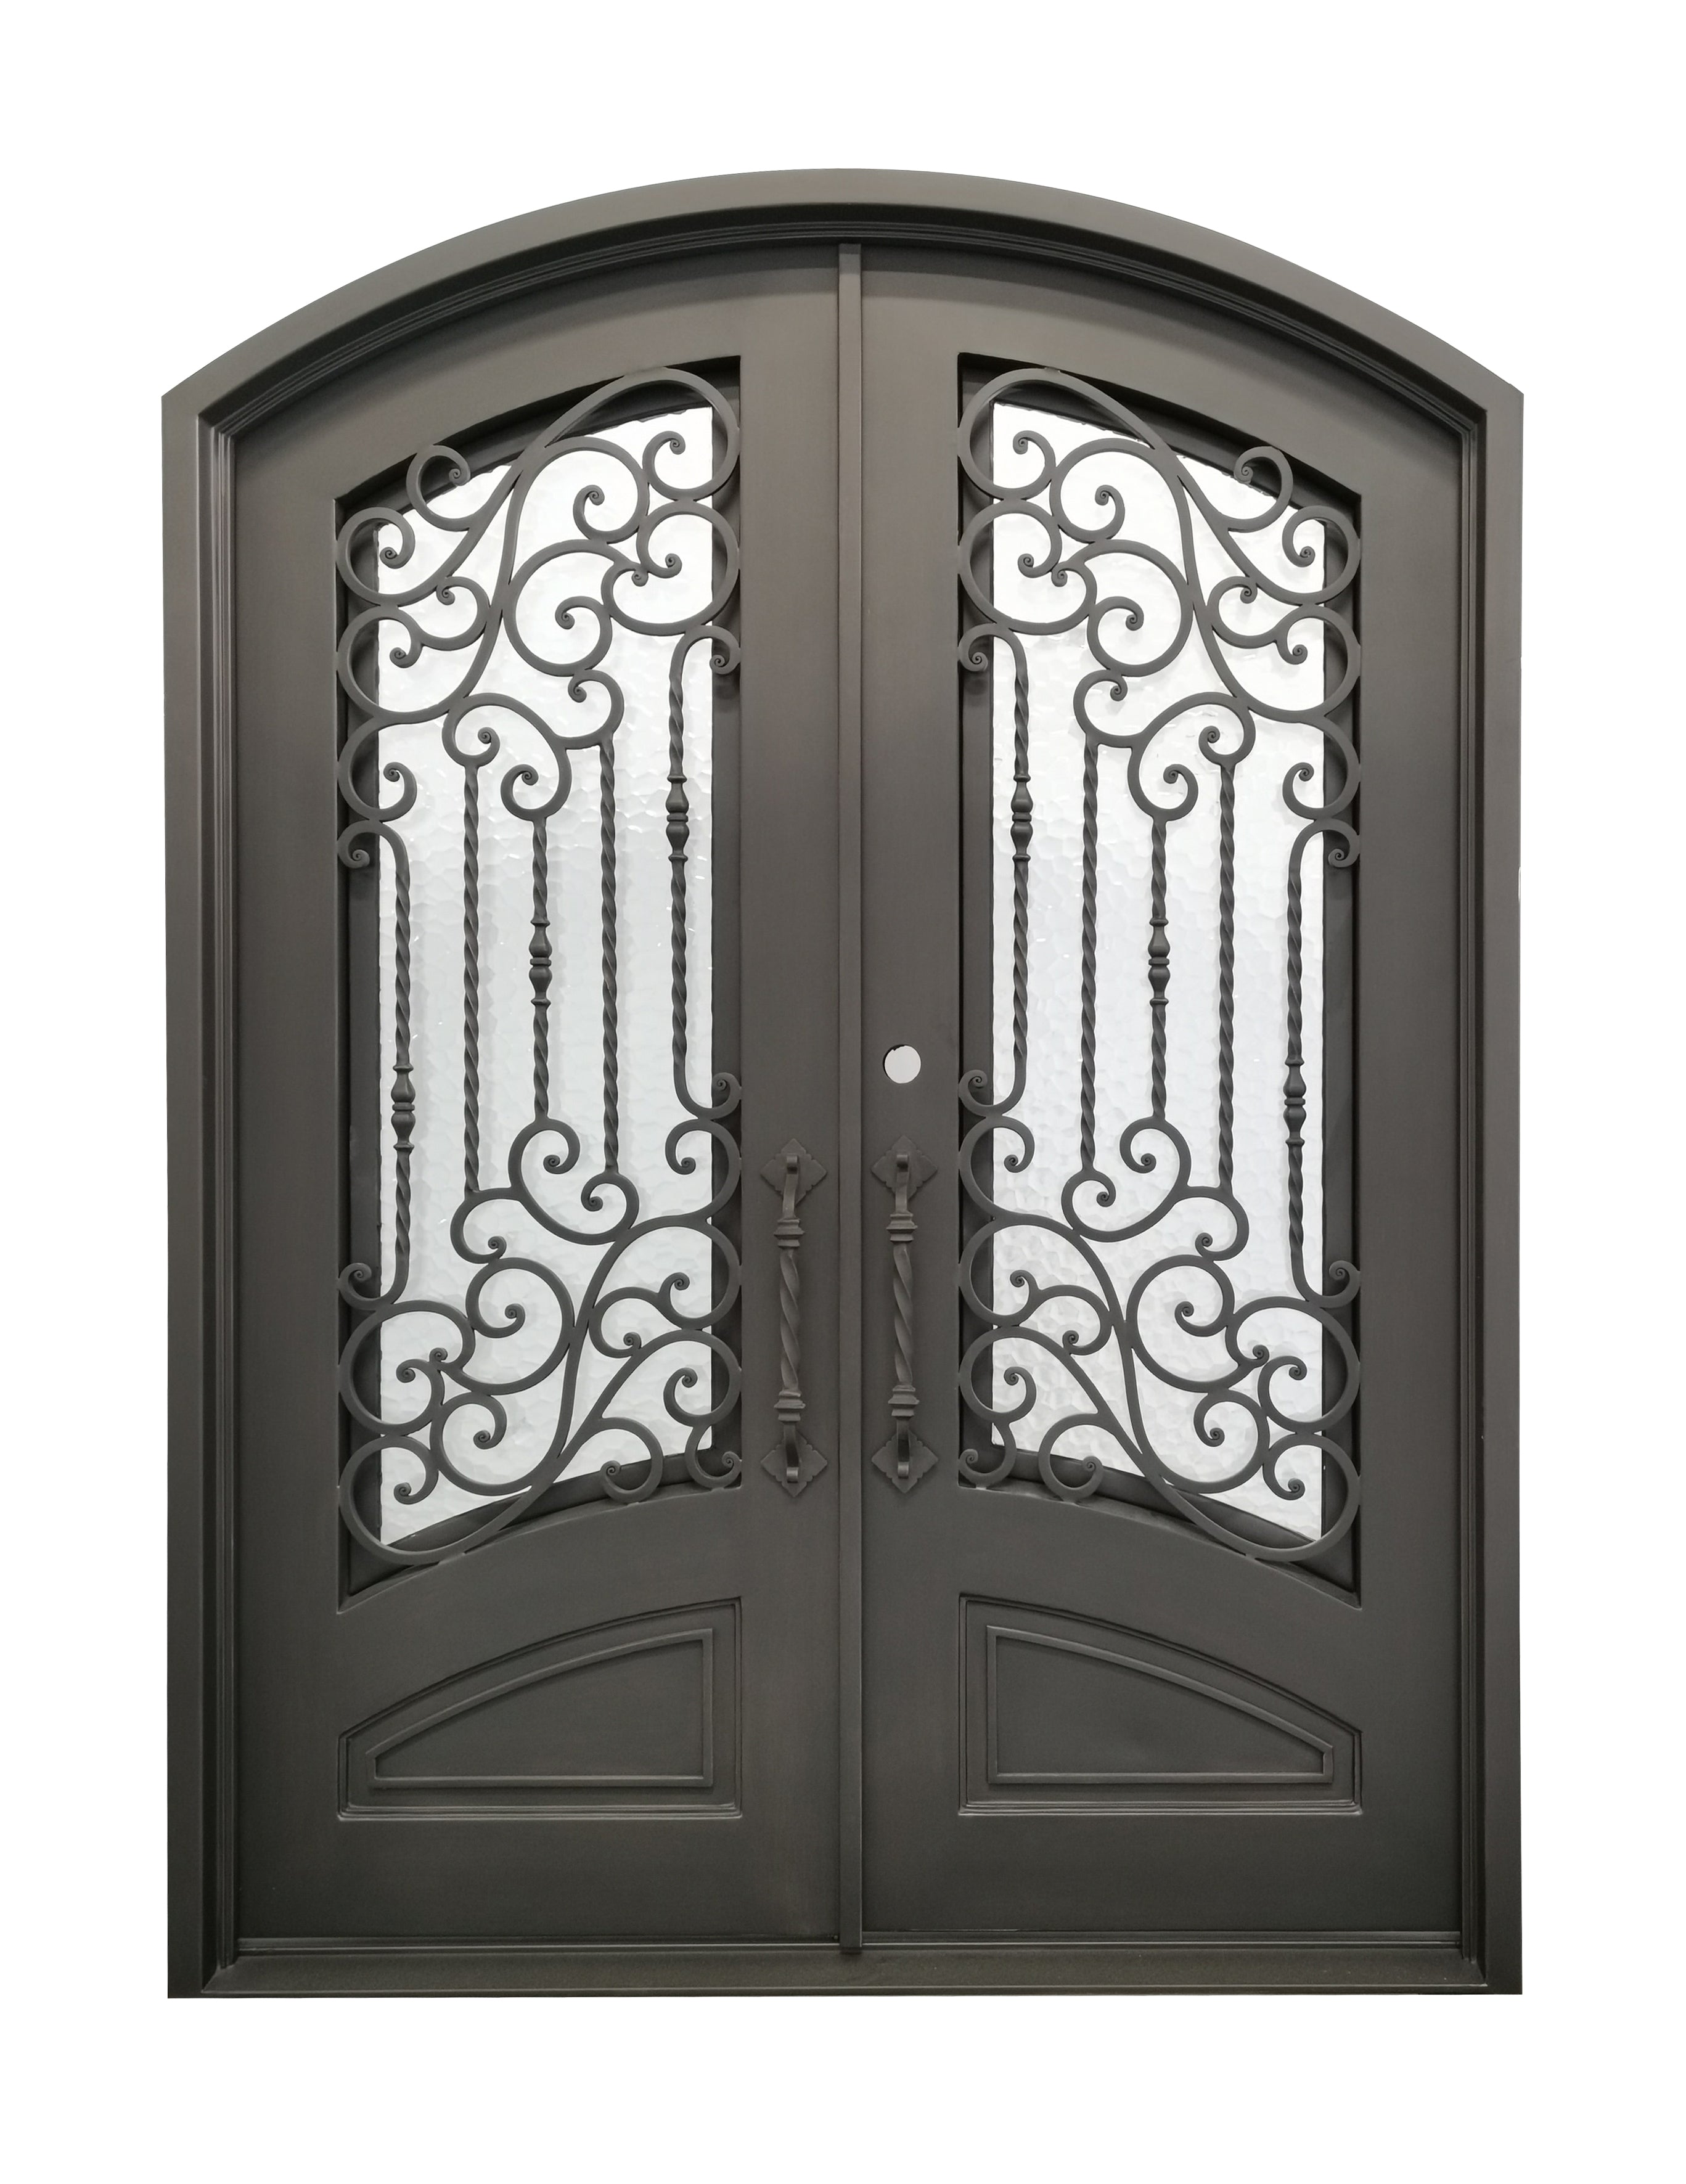 Archer Model Double Front Entry Iron Door With Tempered Water Cubit Glass Dark Bronze Finish - AAWAIZ IMPORTS